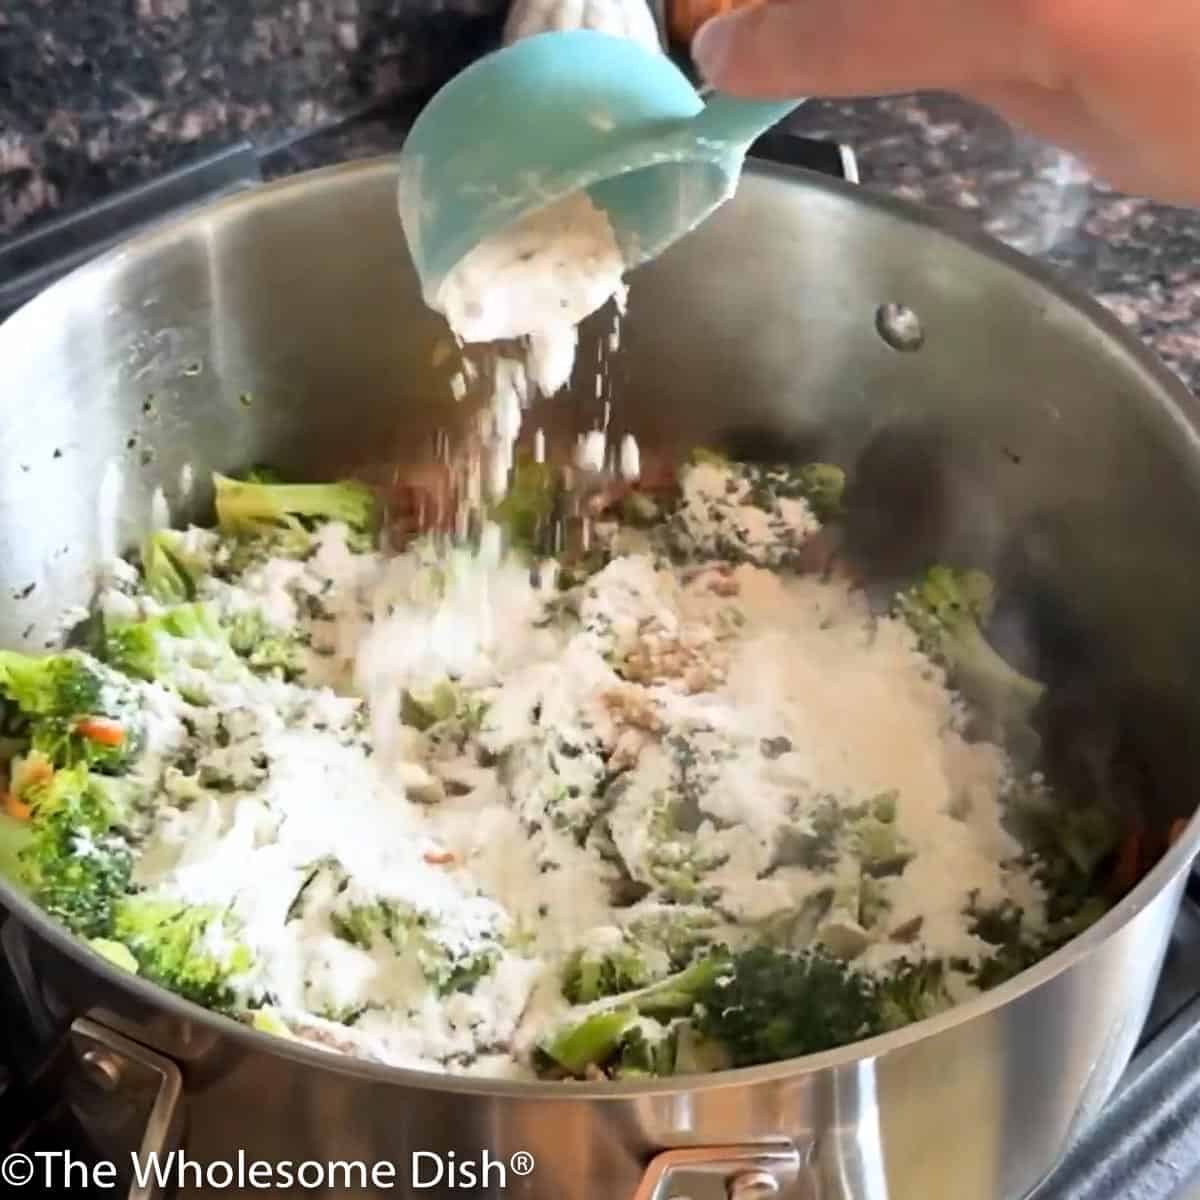 Adding flour to the soup pot full of vegetables.